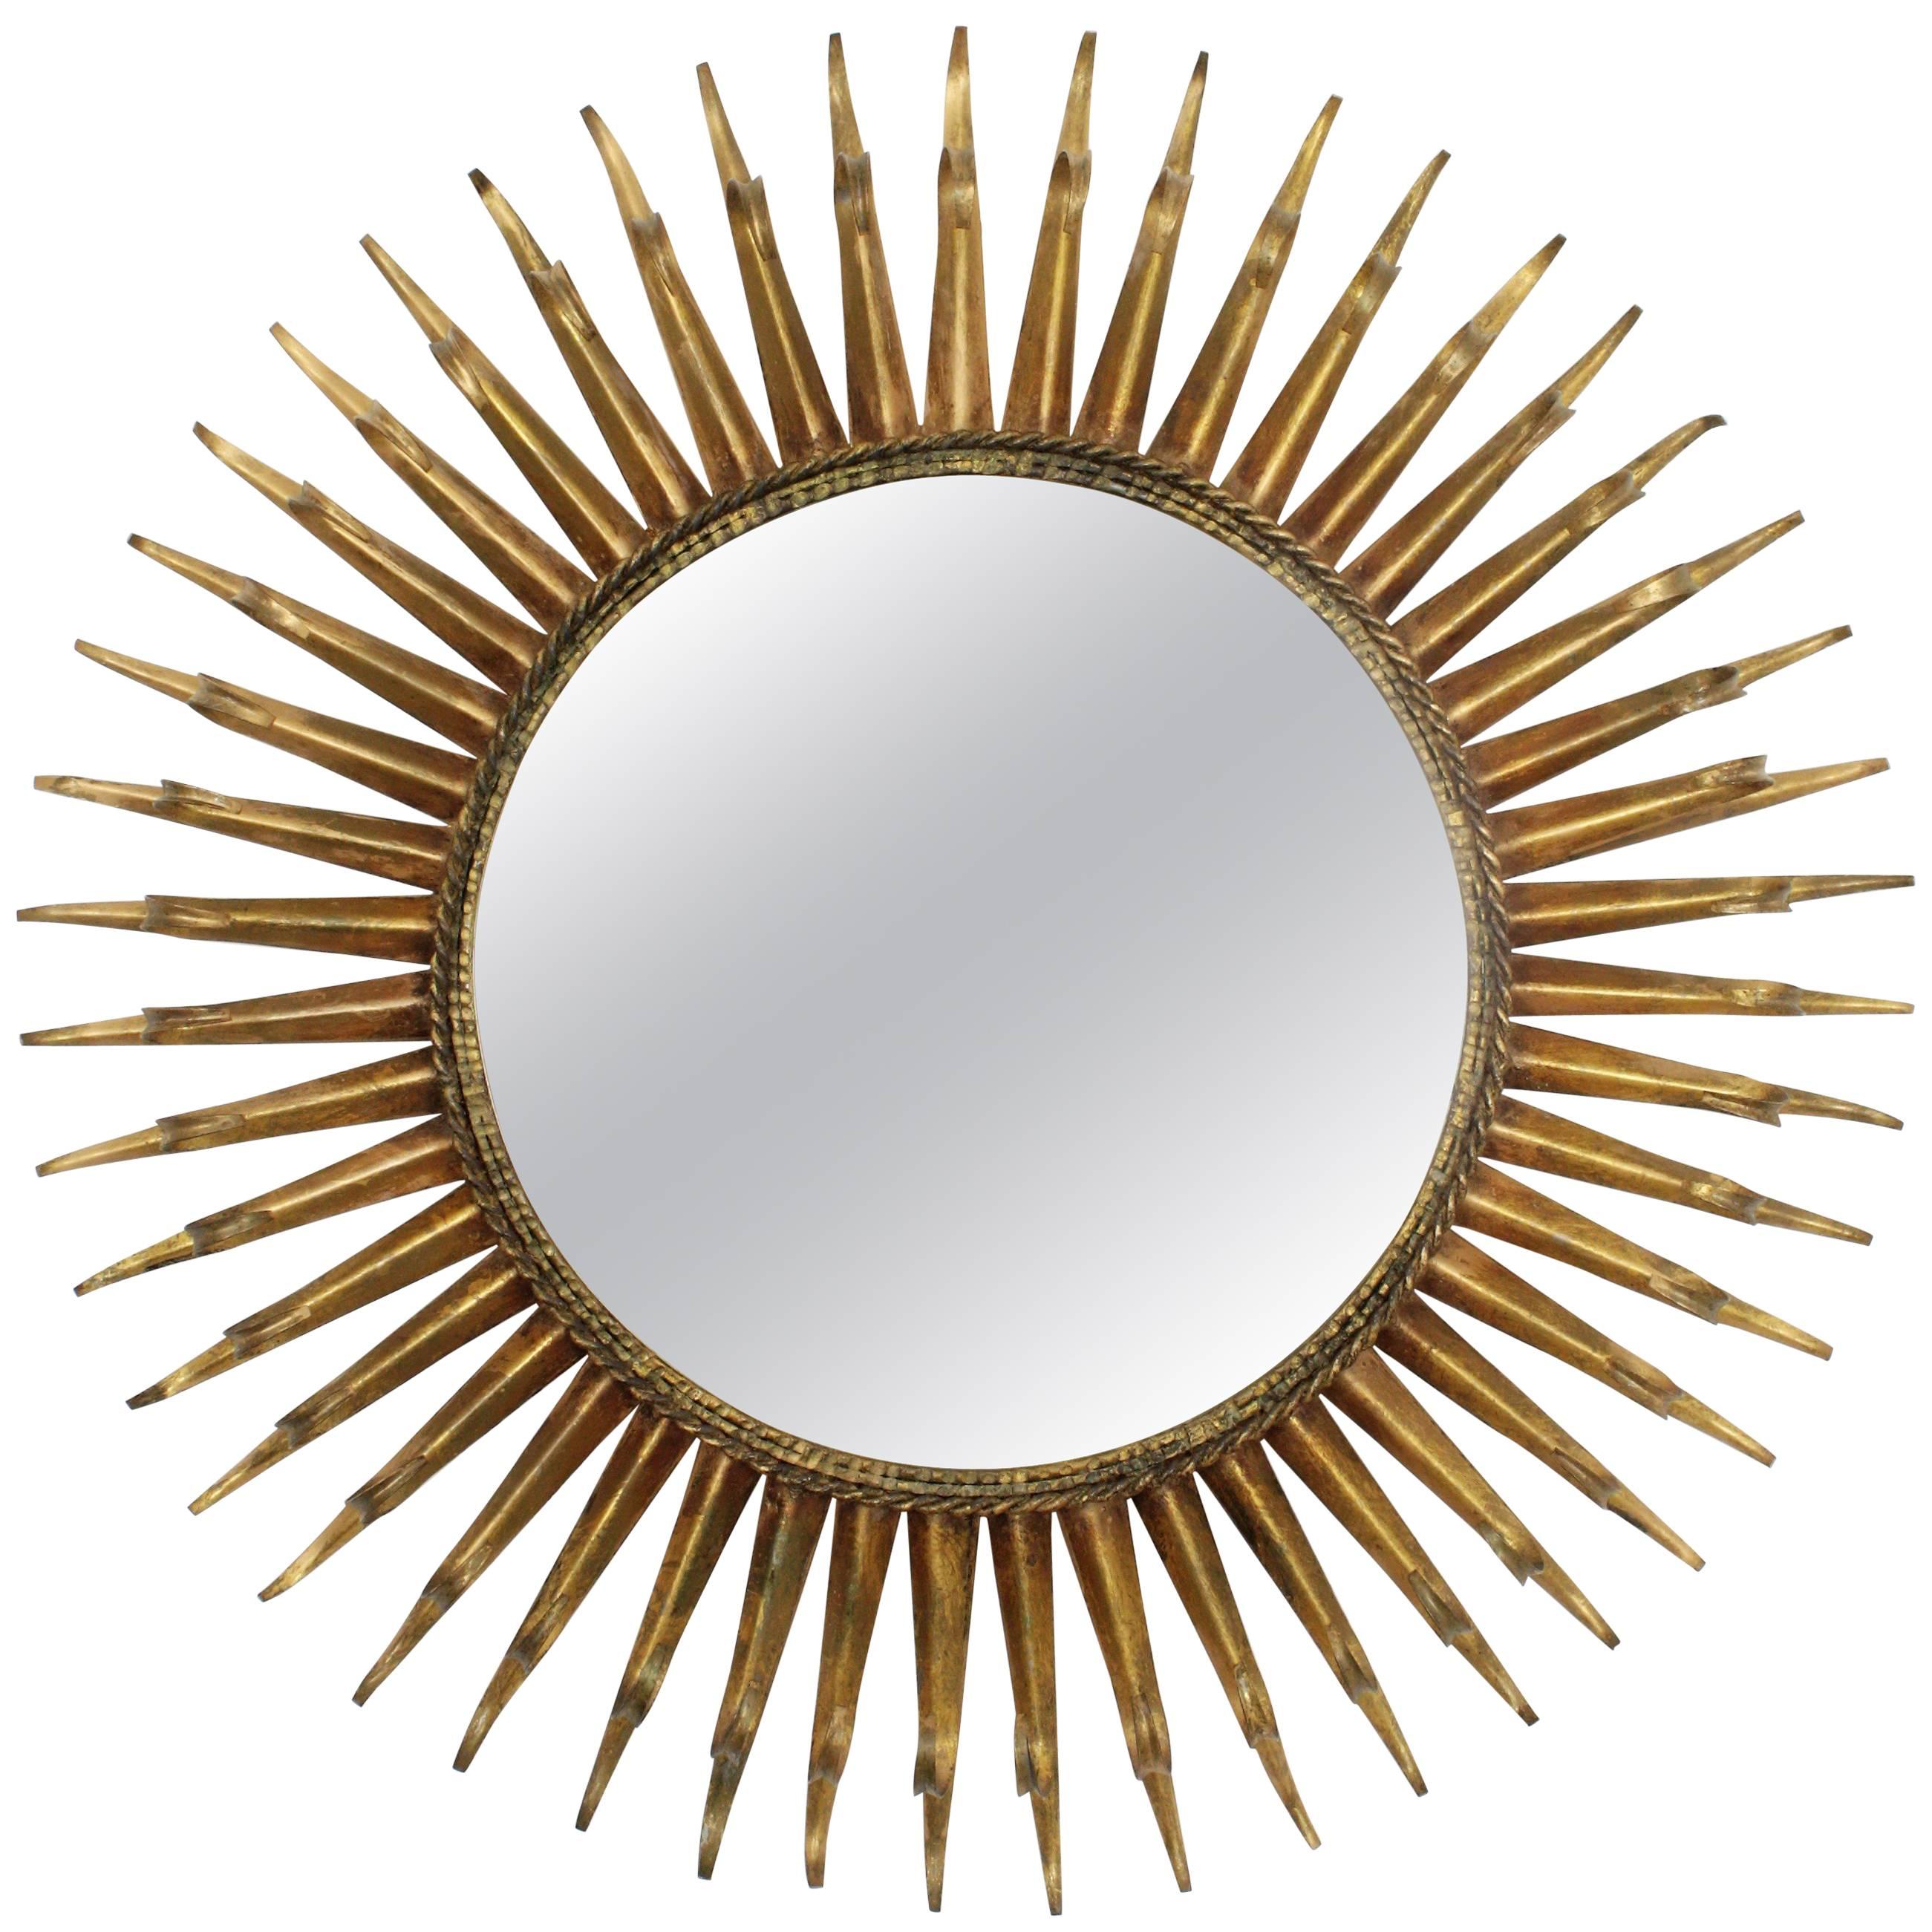 Beautiful gilt iron sunburst mirror with gold leaf patina and a highly decorative frame with eyelashed beams,
France, 1960s.

Measures: Glass surface 39cm diameter.

Available a huge collection of sunburst mirrors and other kind of mirrors.